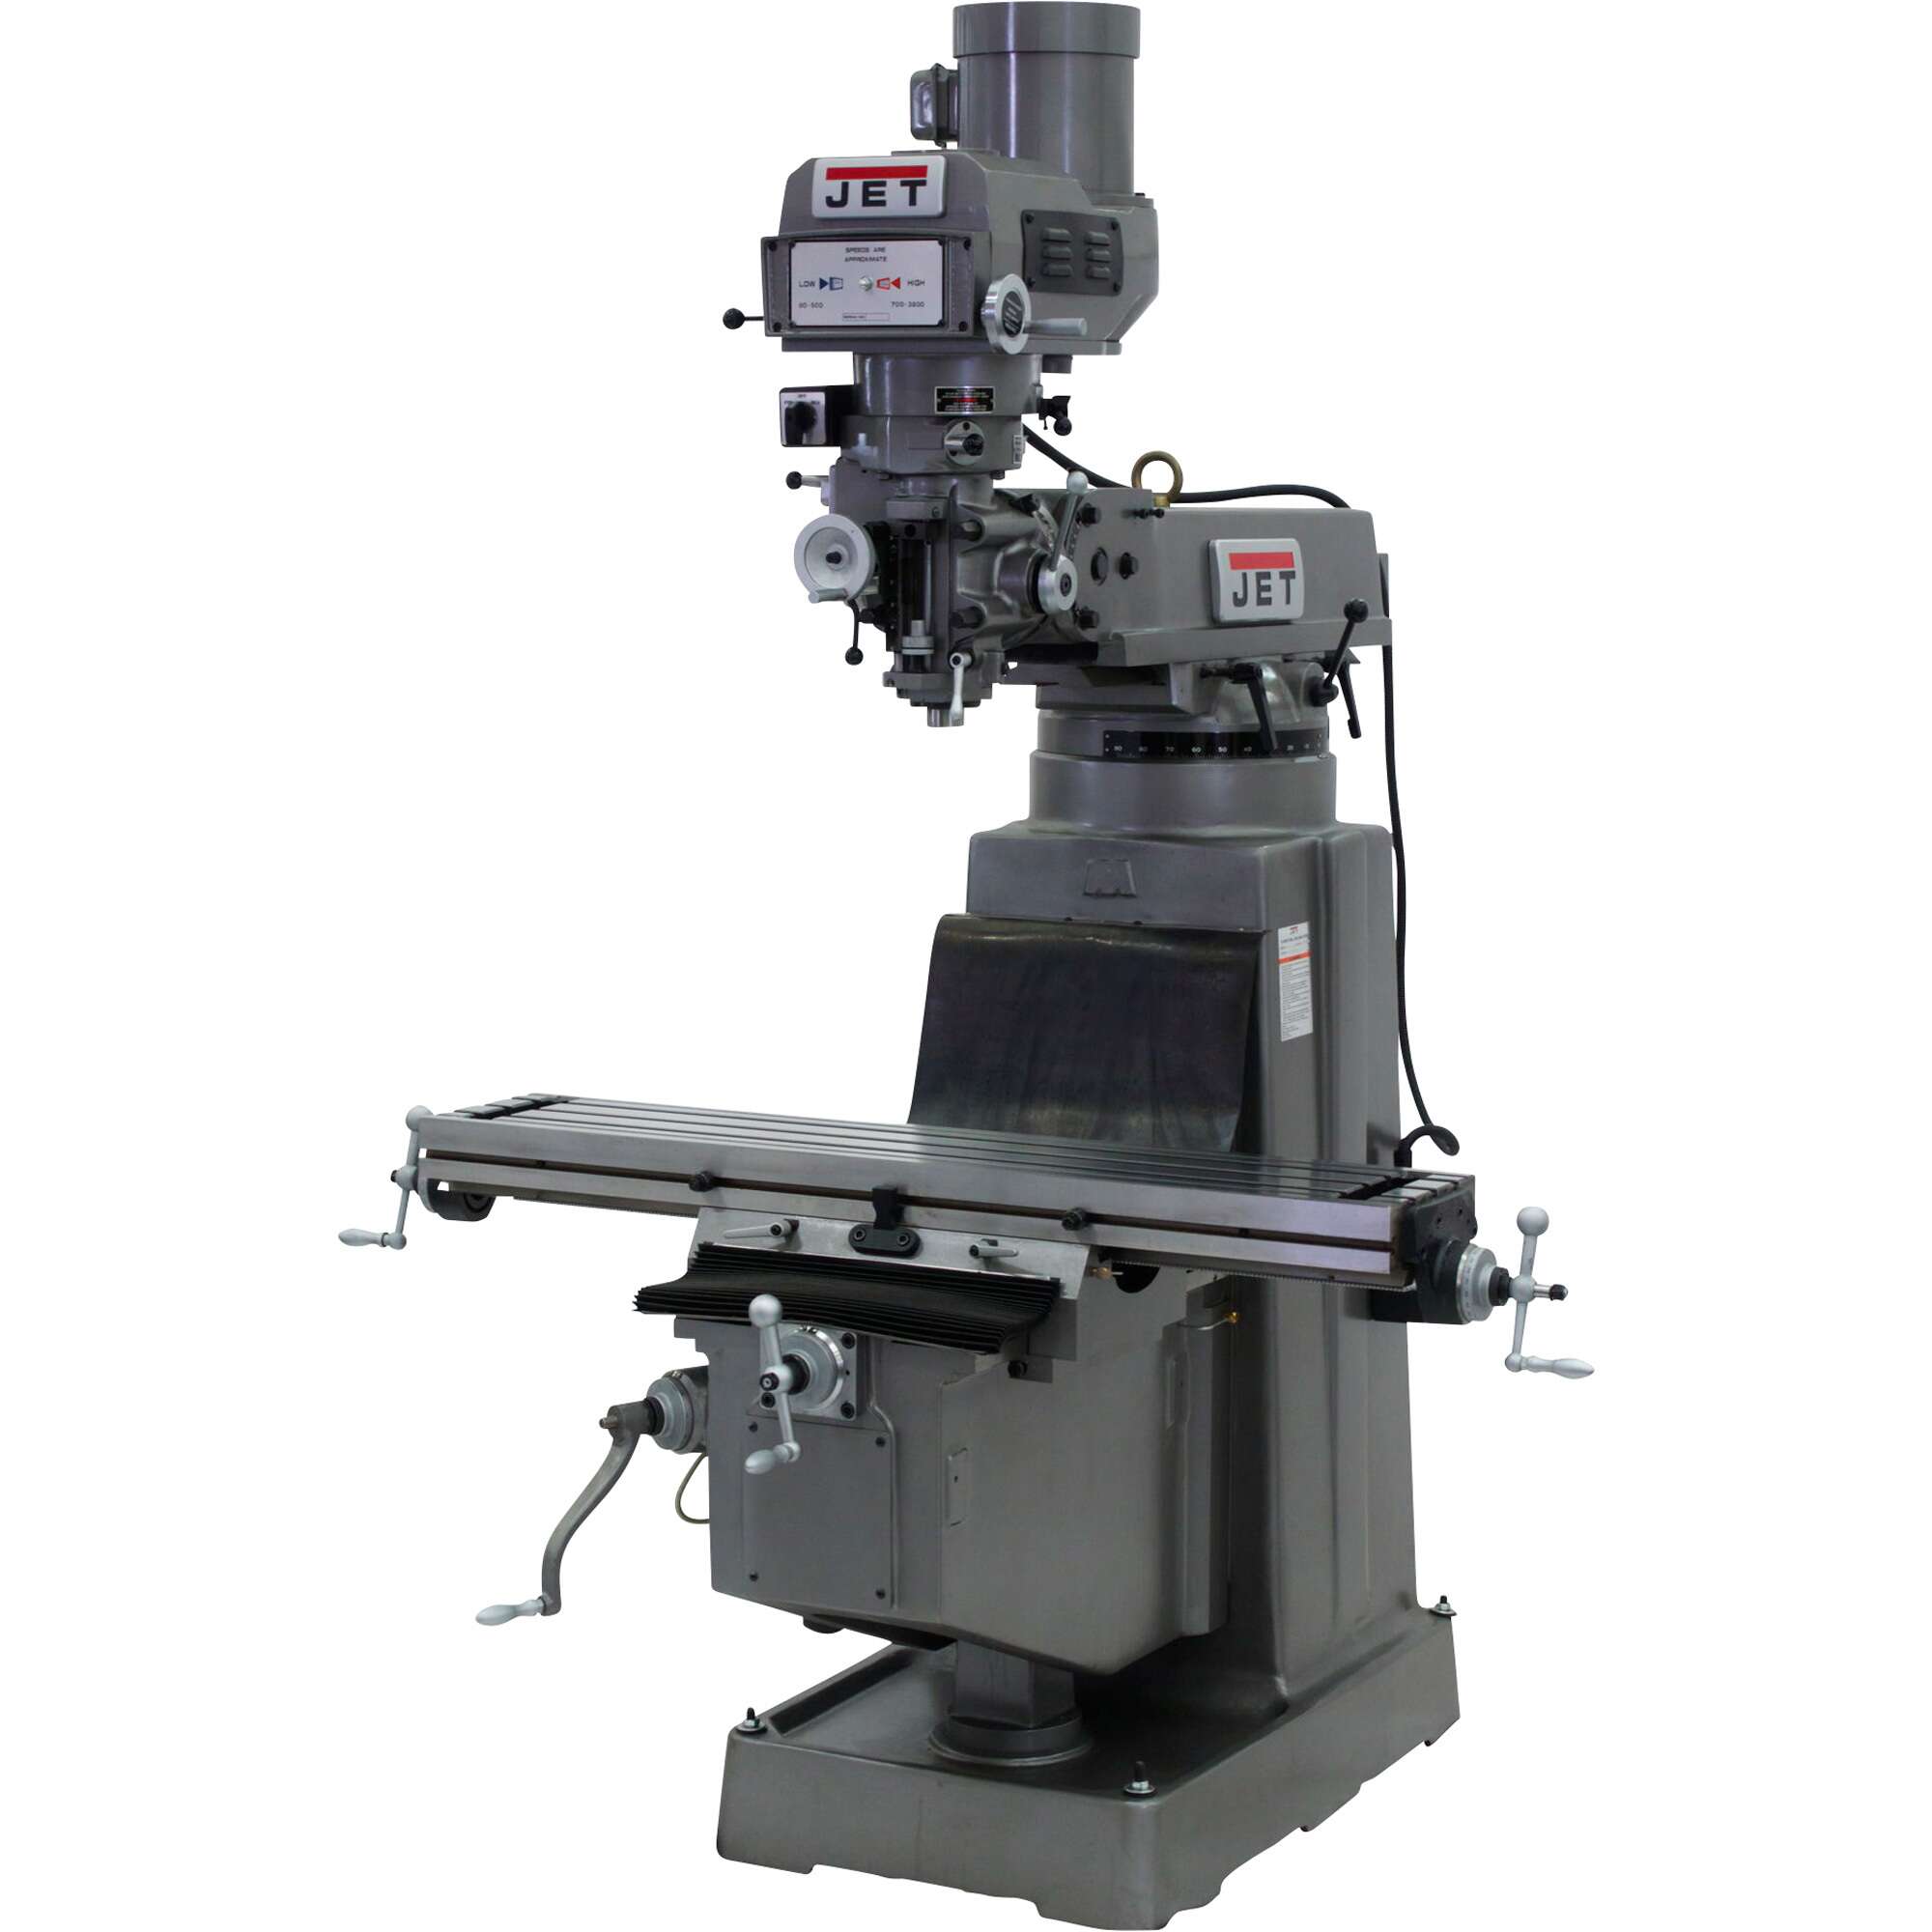 JET Variable Speed Milling Machine with X and Y Axis Powerfeeds 10in x 50in 230 Volt 3Phase